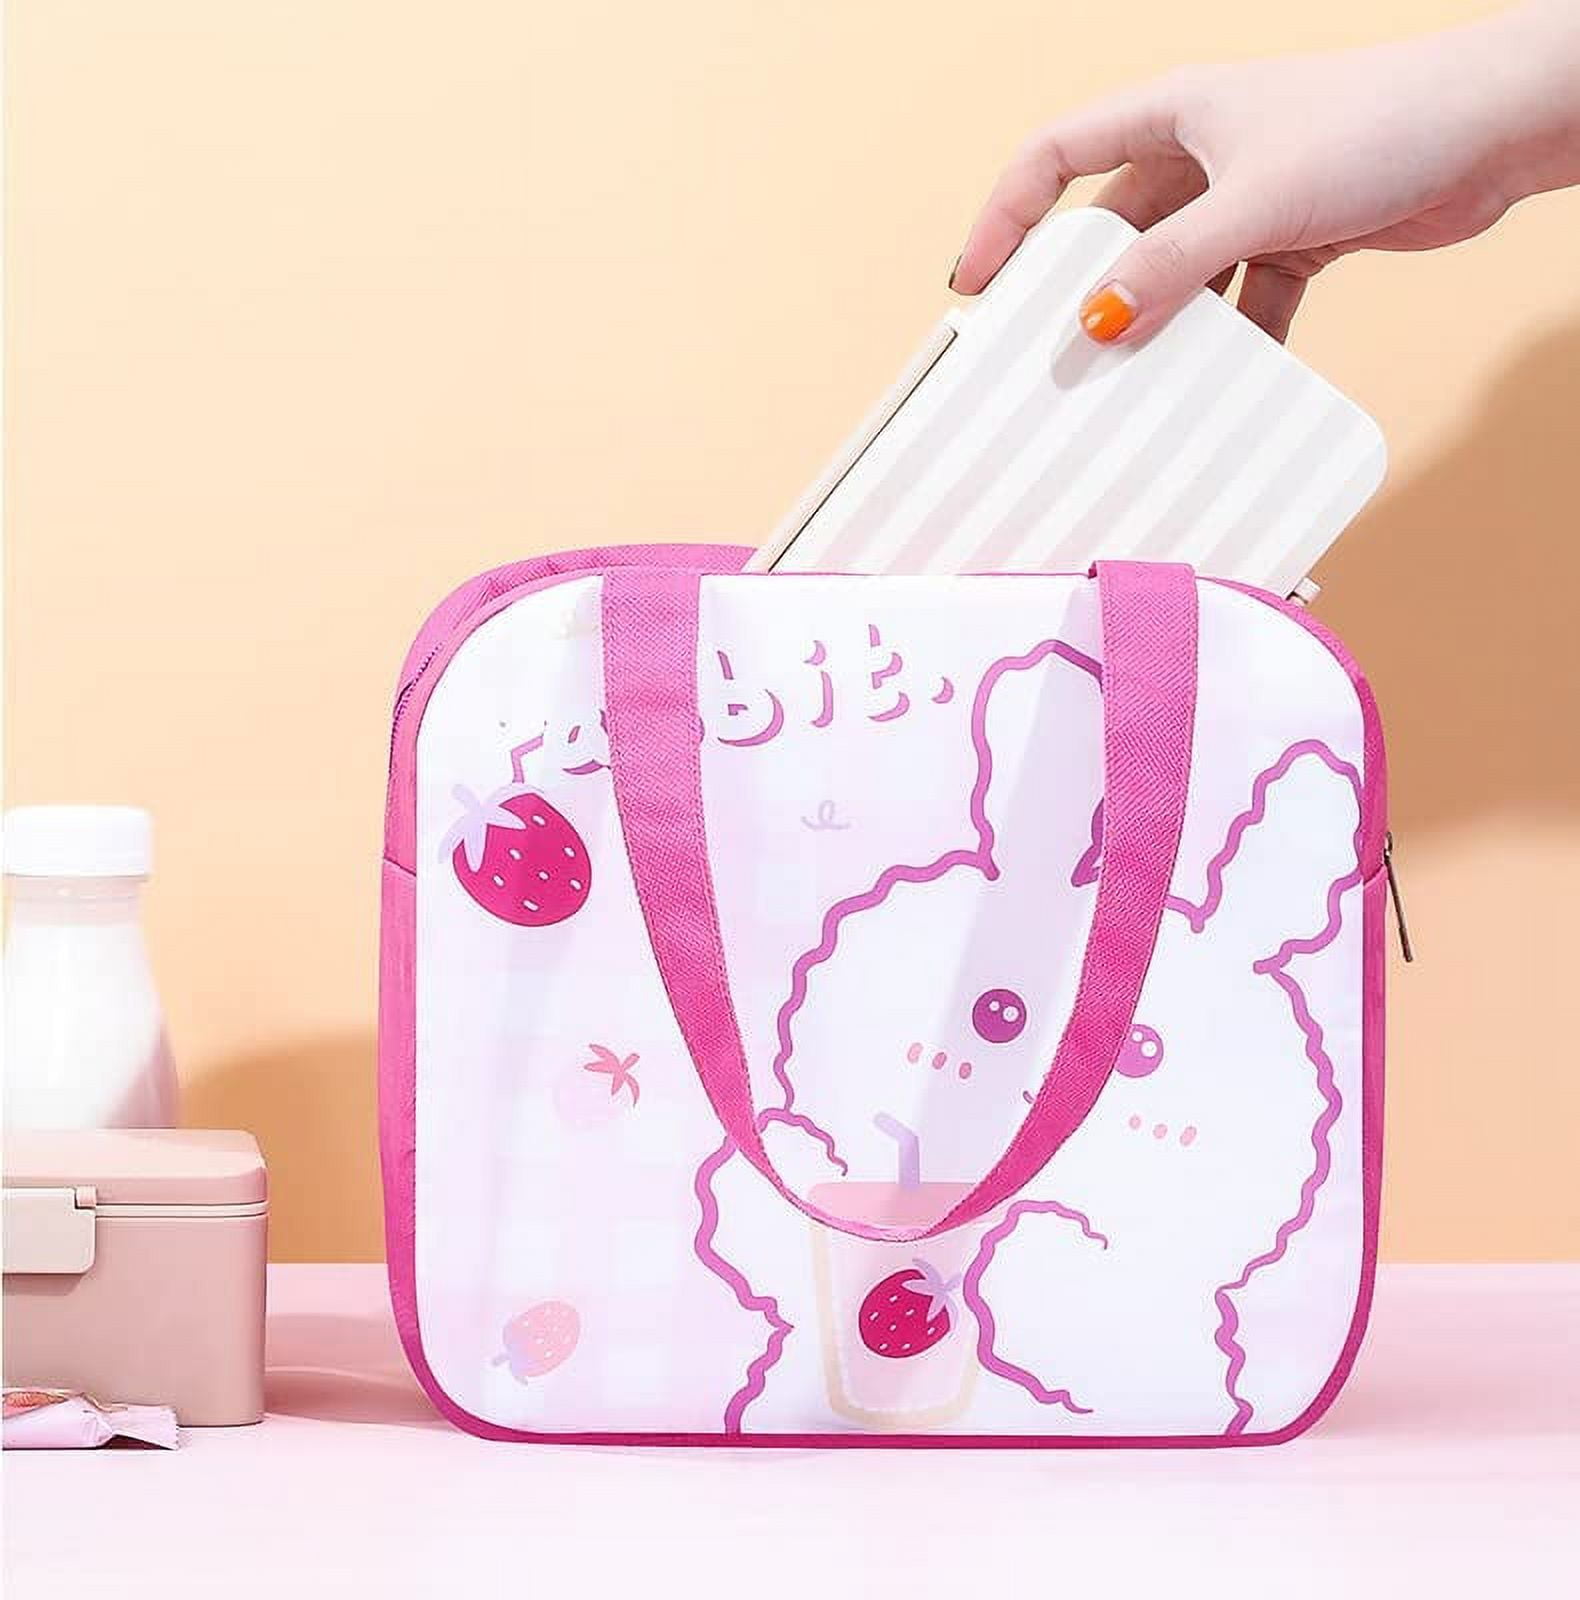 Danceemangoos Kawaii Lunch Bag Cute Embroidery Lunch Box Large Capacity Japanese Aesthetic Insulated Tote Bag for Back to School Supplies (Pink)